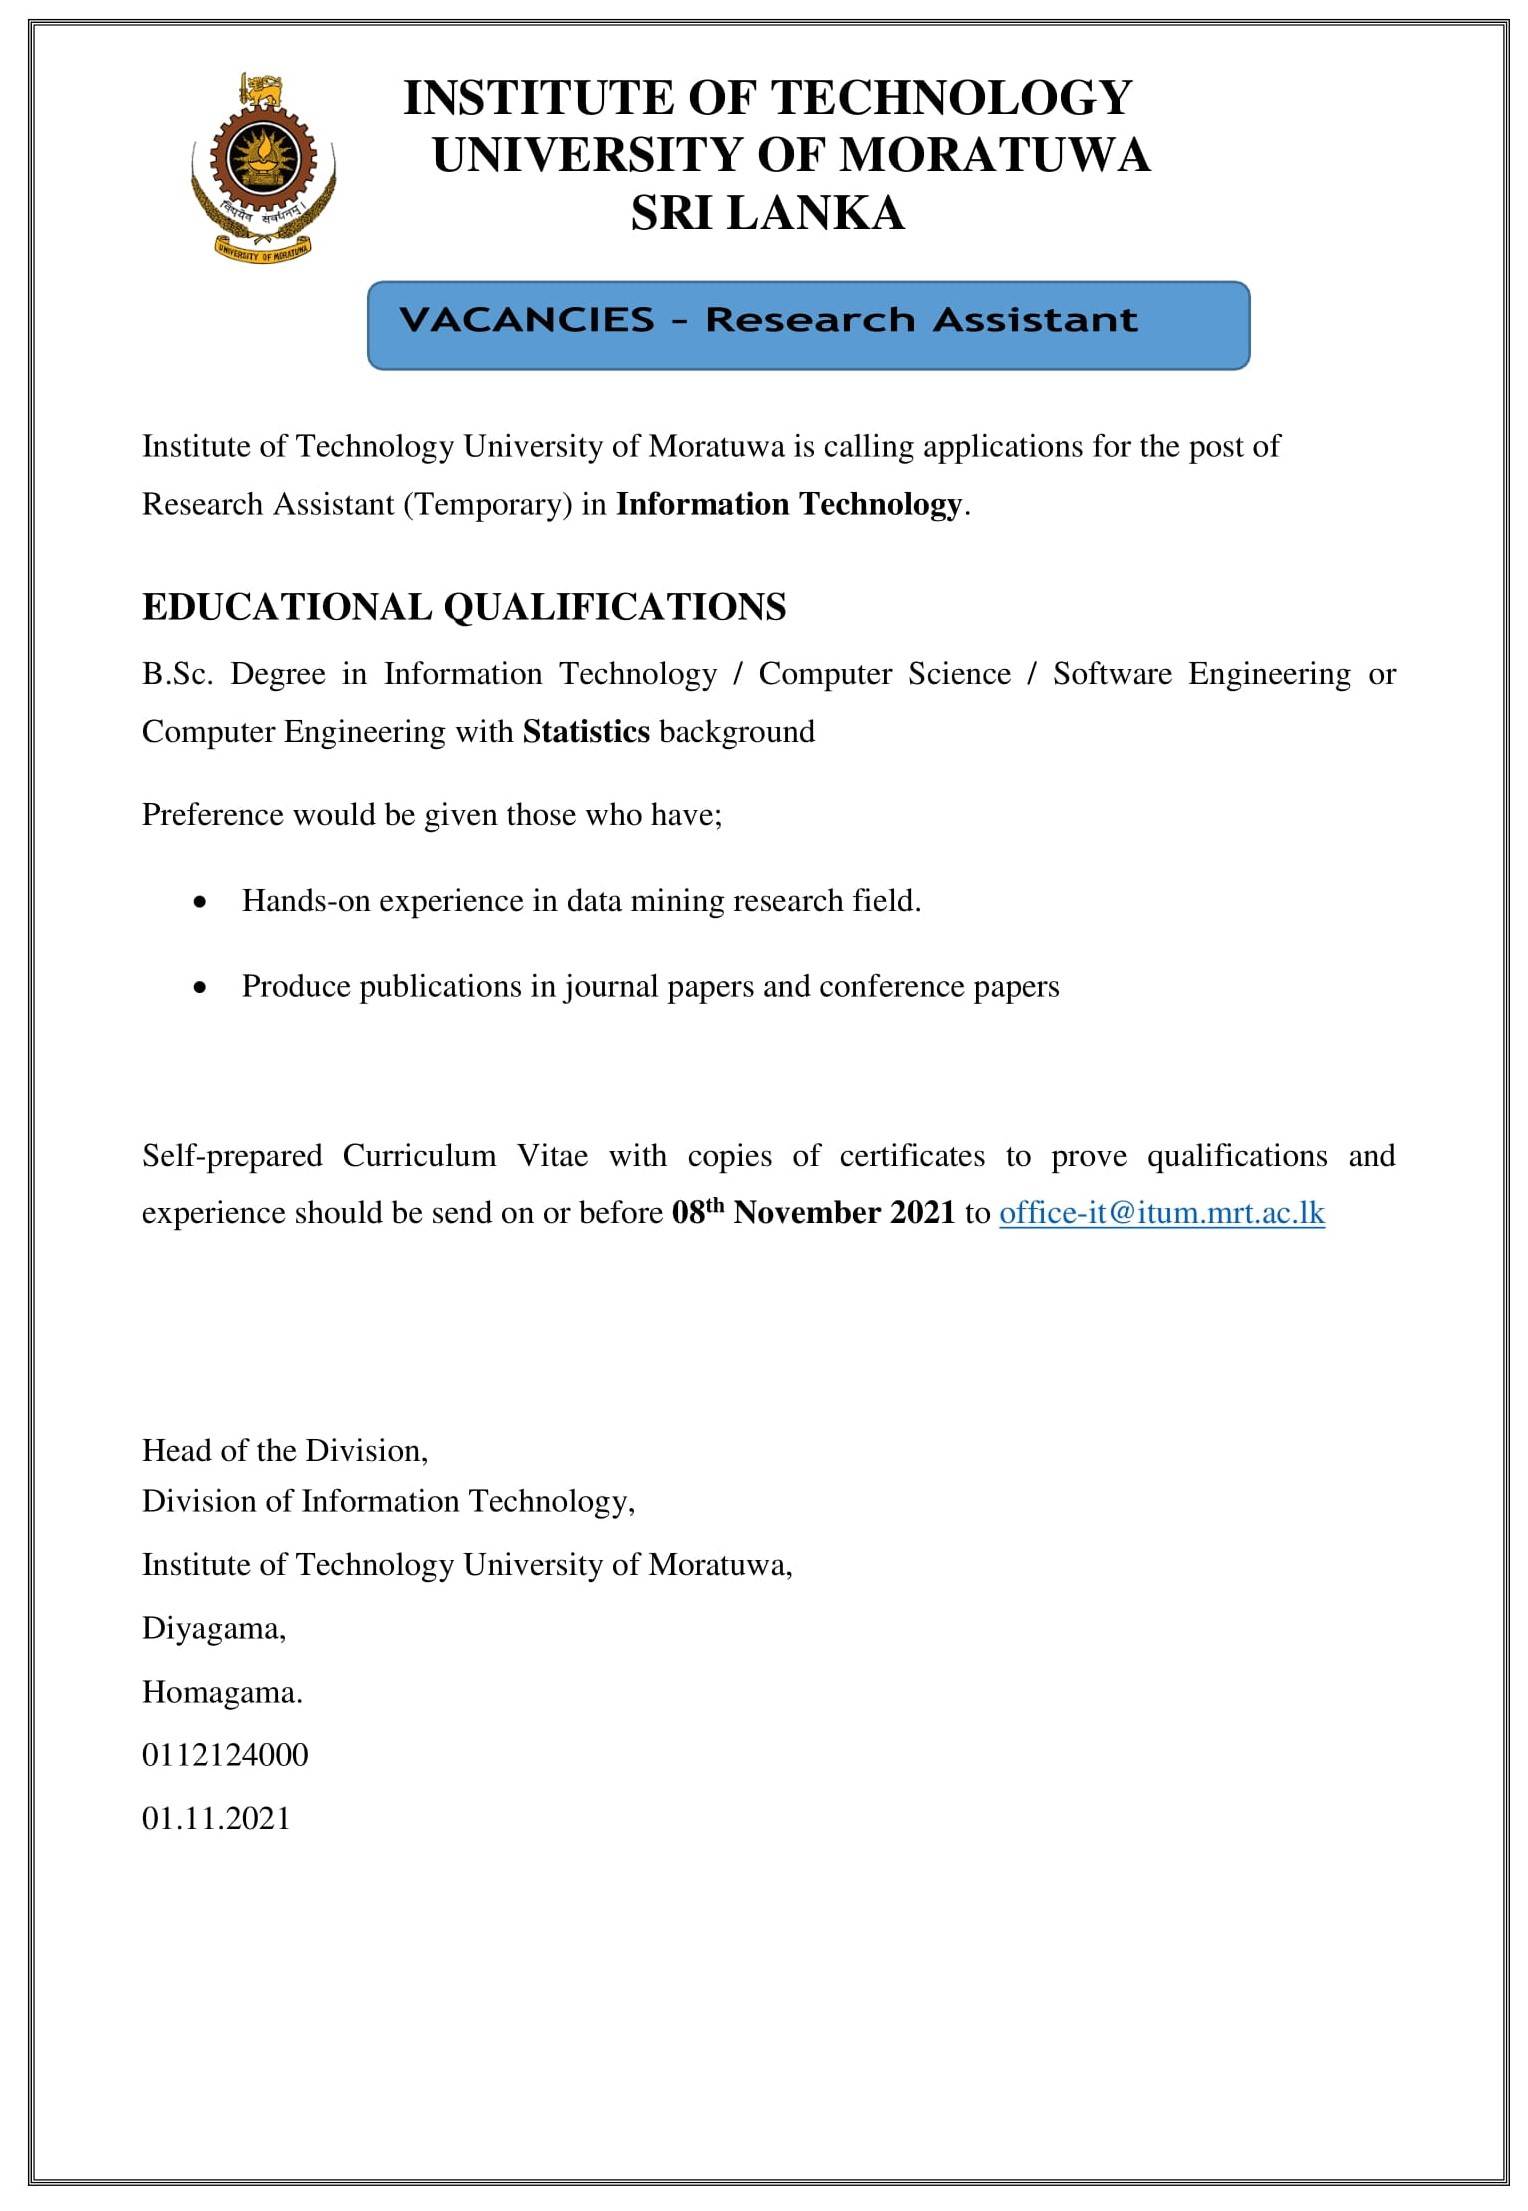 Research Assistant - Institute of Technology - University of Moratuwa